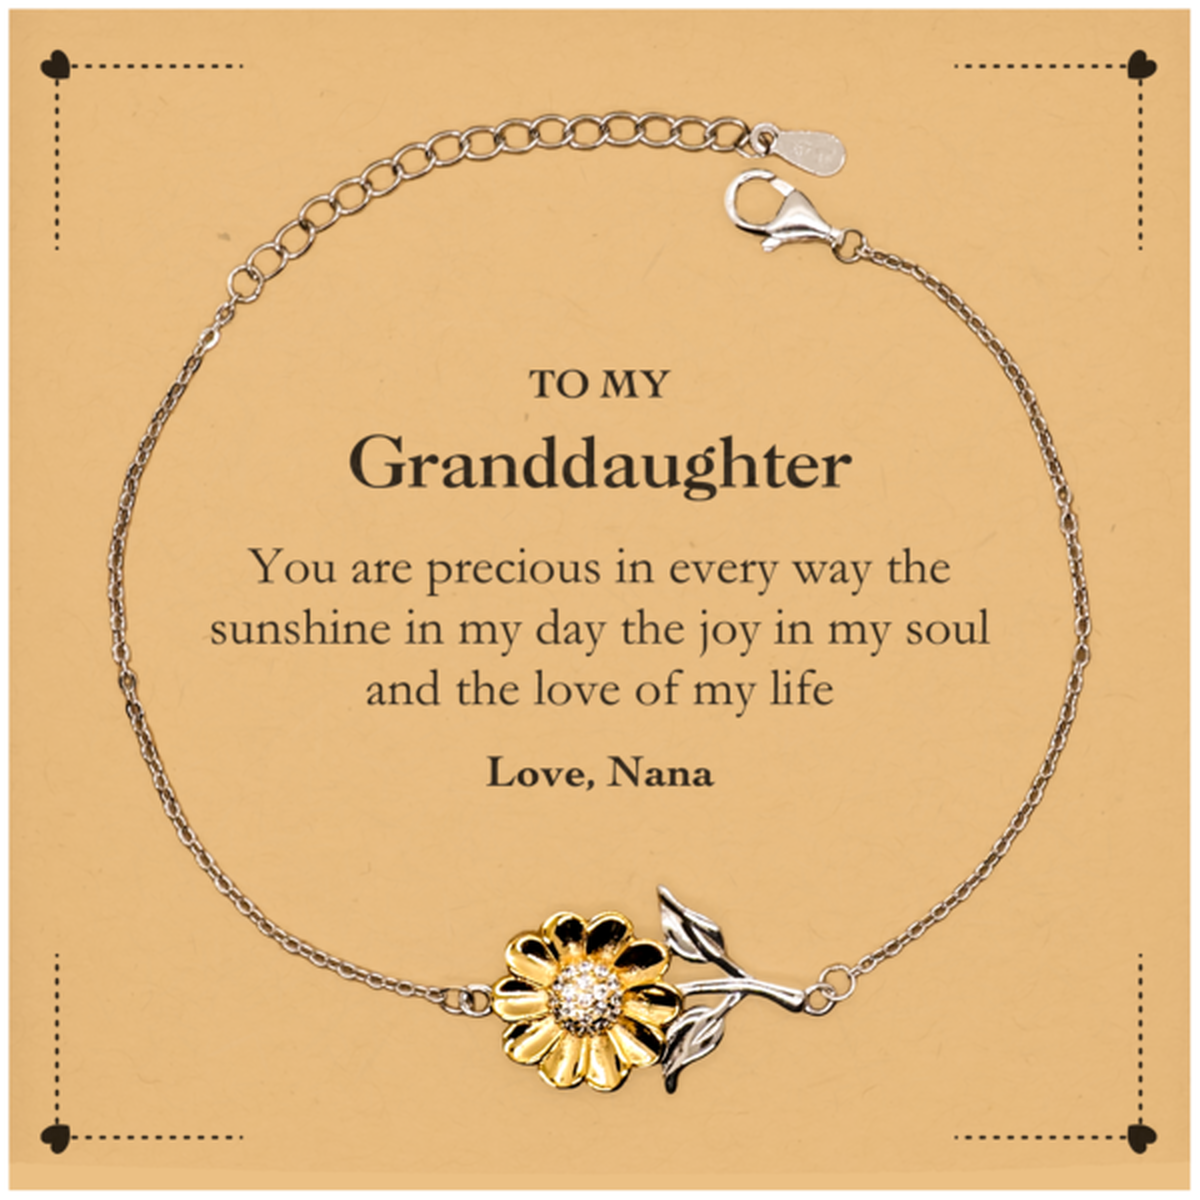 Graduation Gifts for Granddaughter Sunflower Bracelet Present from Nana, Christmas Granddaughter Birthday Gifts Granddaughter You are precious in every way the sunshine in my day. Love, Nana